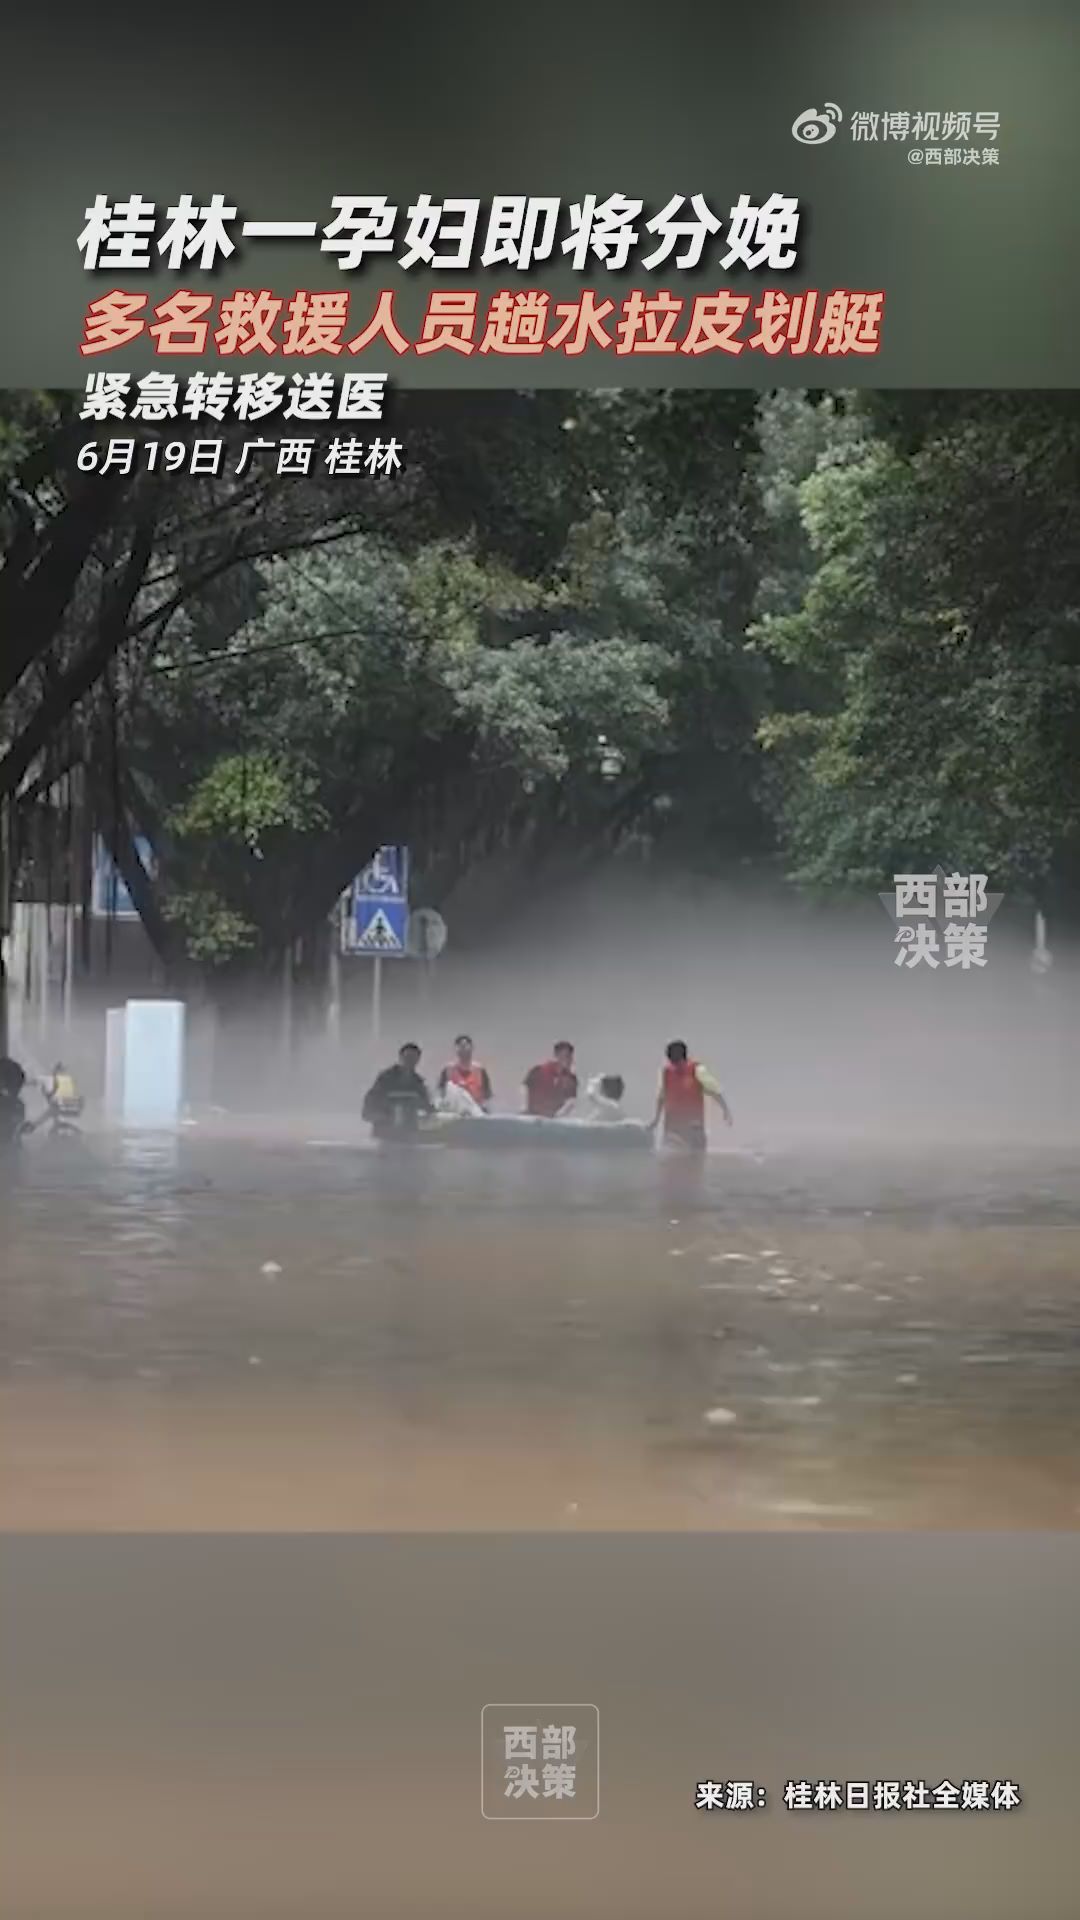  A pregnant woman in Guilin was in labor and several people went to the water to pull a kayak to send her to the hospital